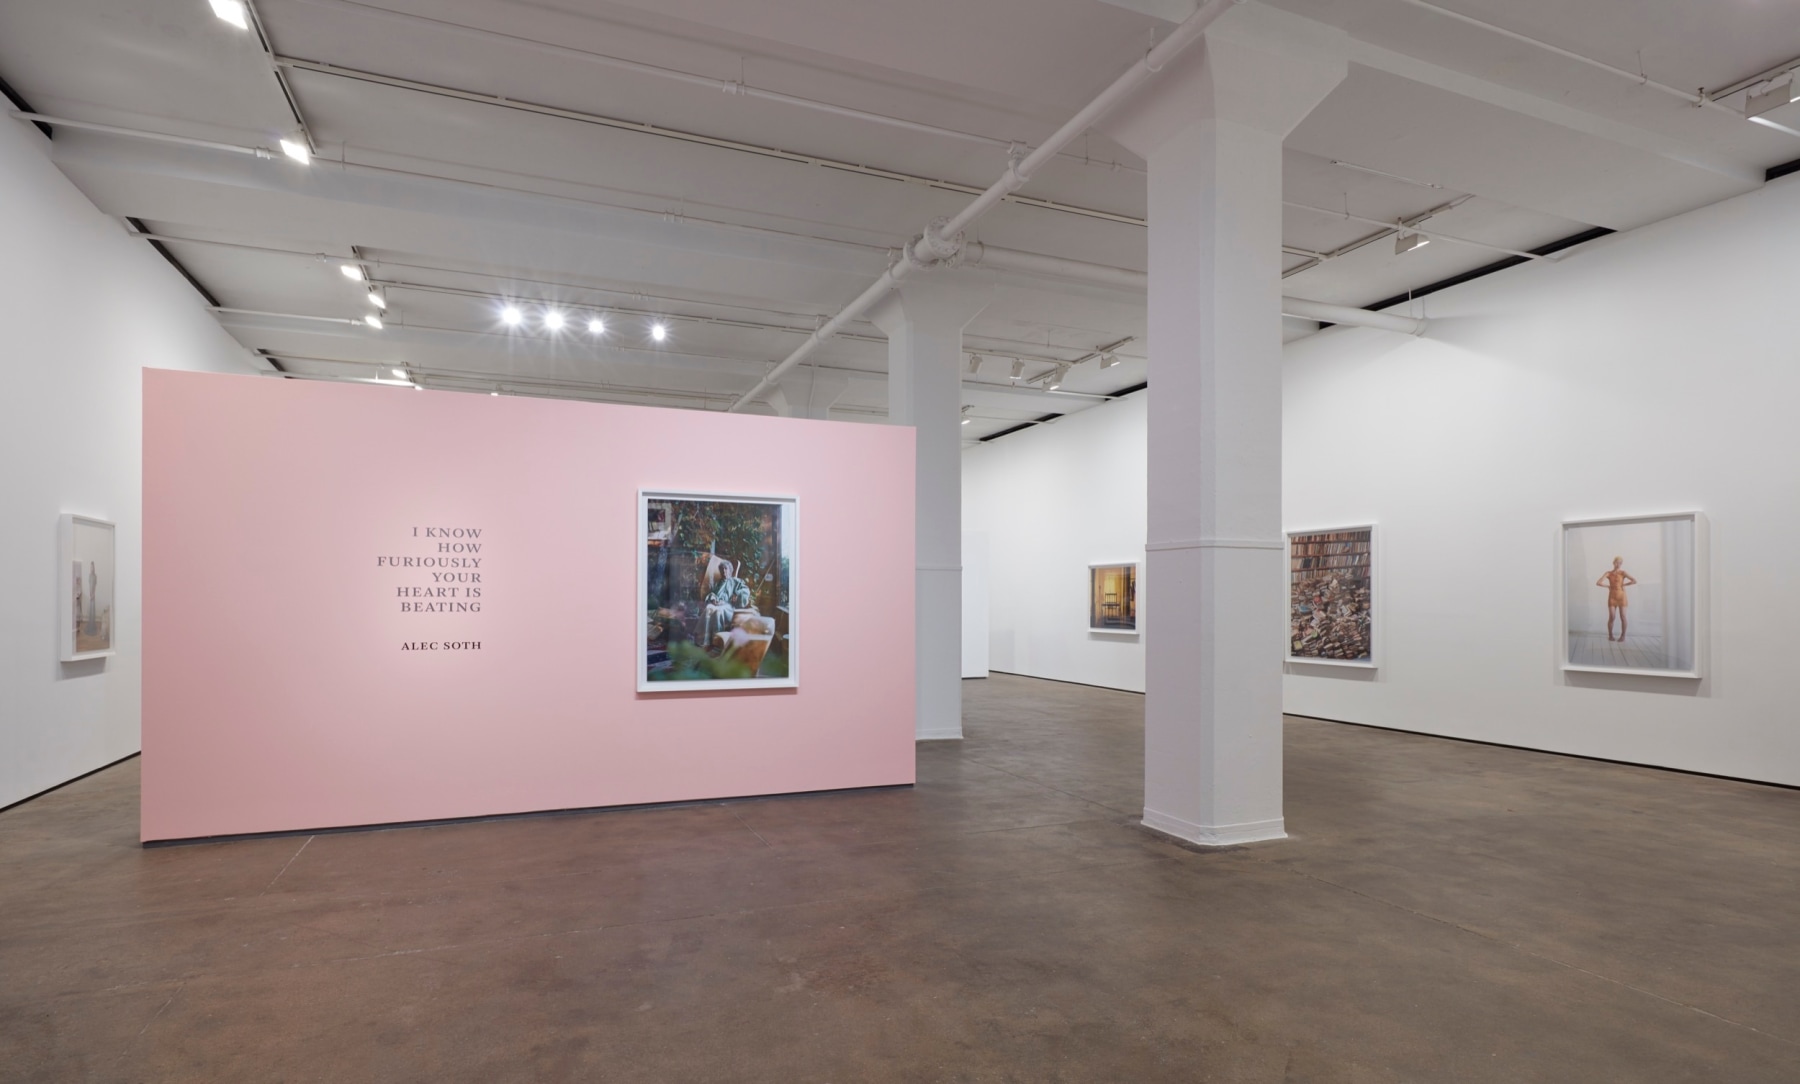 Installation view of Alec Soth: I Know How Furiously Your Heart Is Beating at Sean Kelly, New York